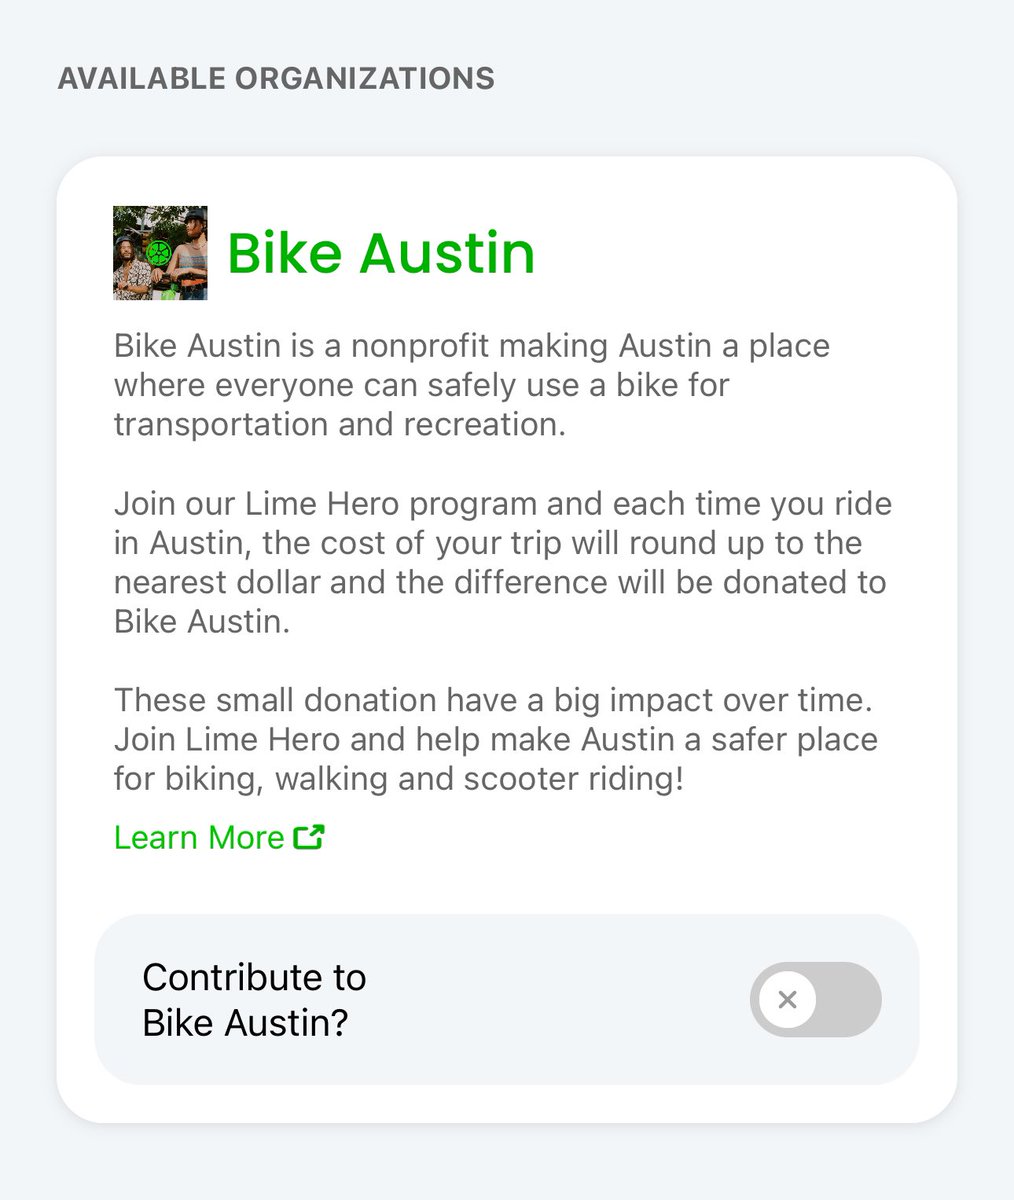 Well I guess if @limebike is gouging to help build more bike lanes, I’m all for it.